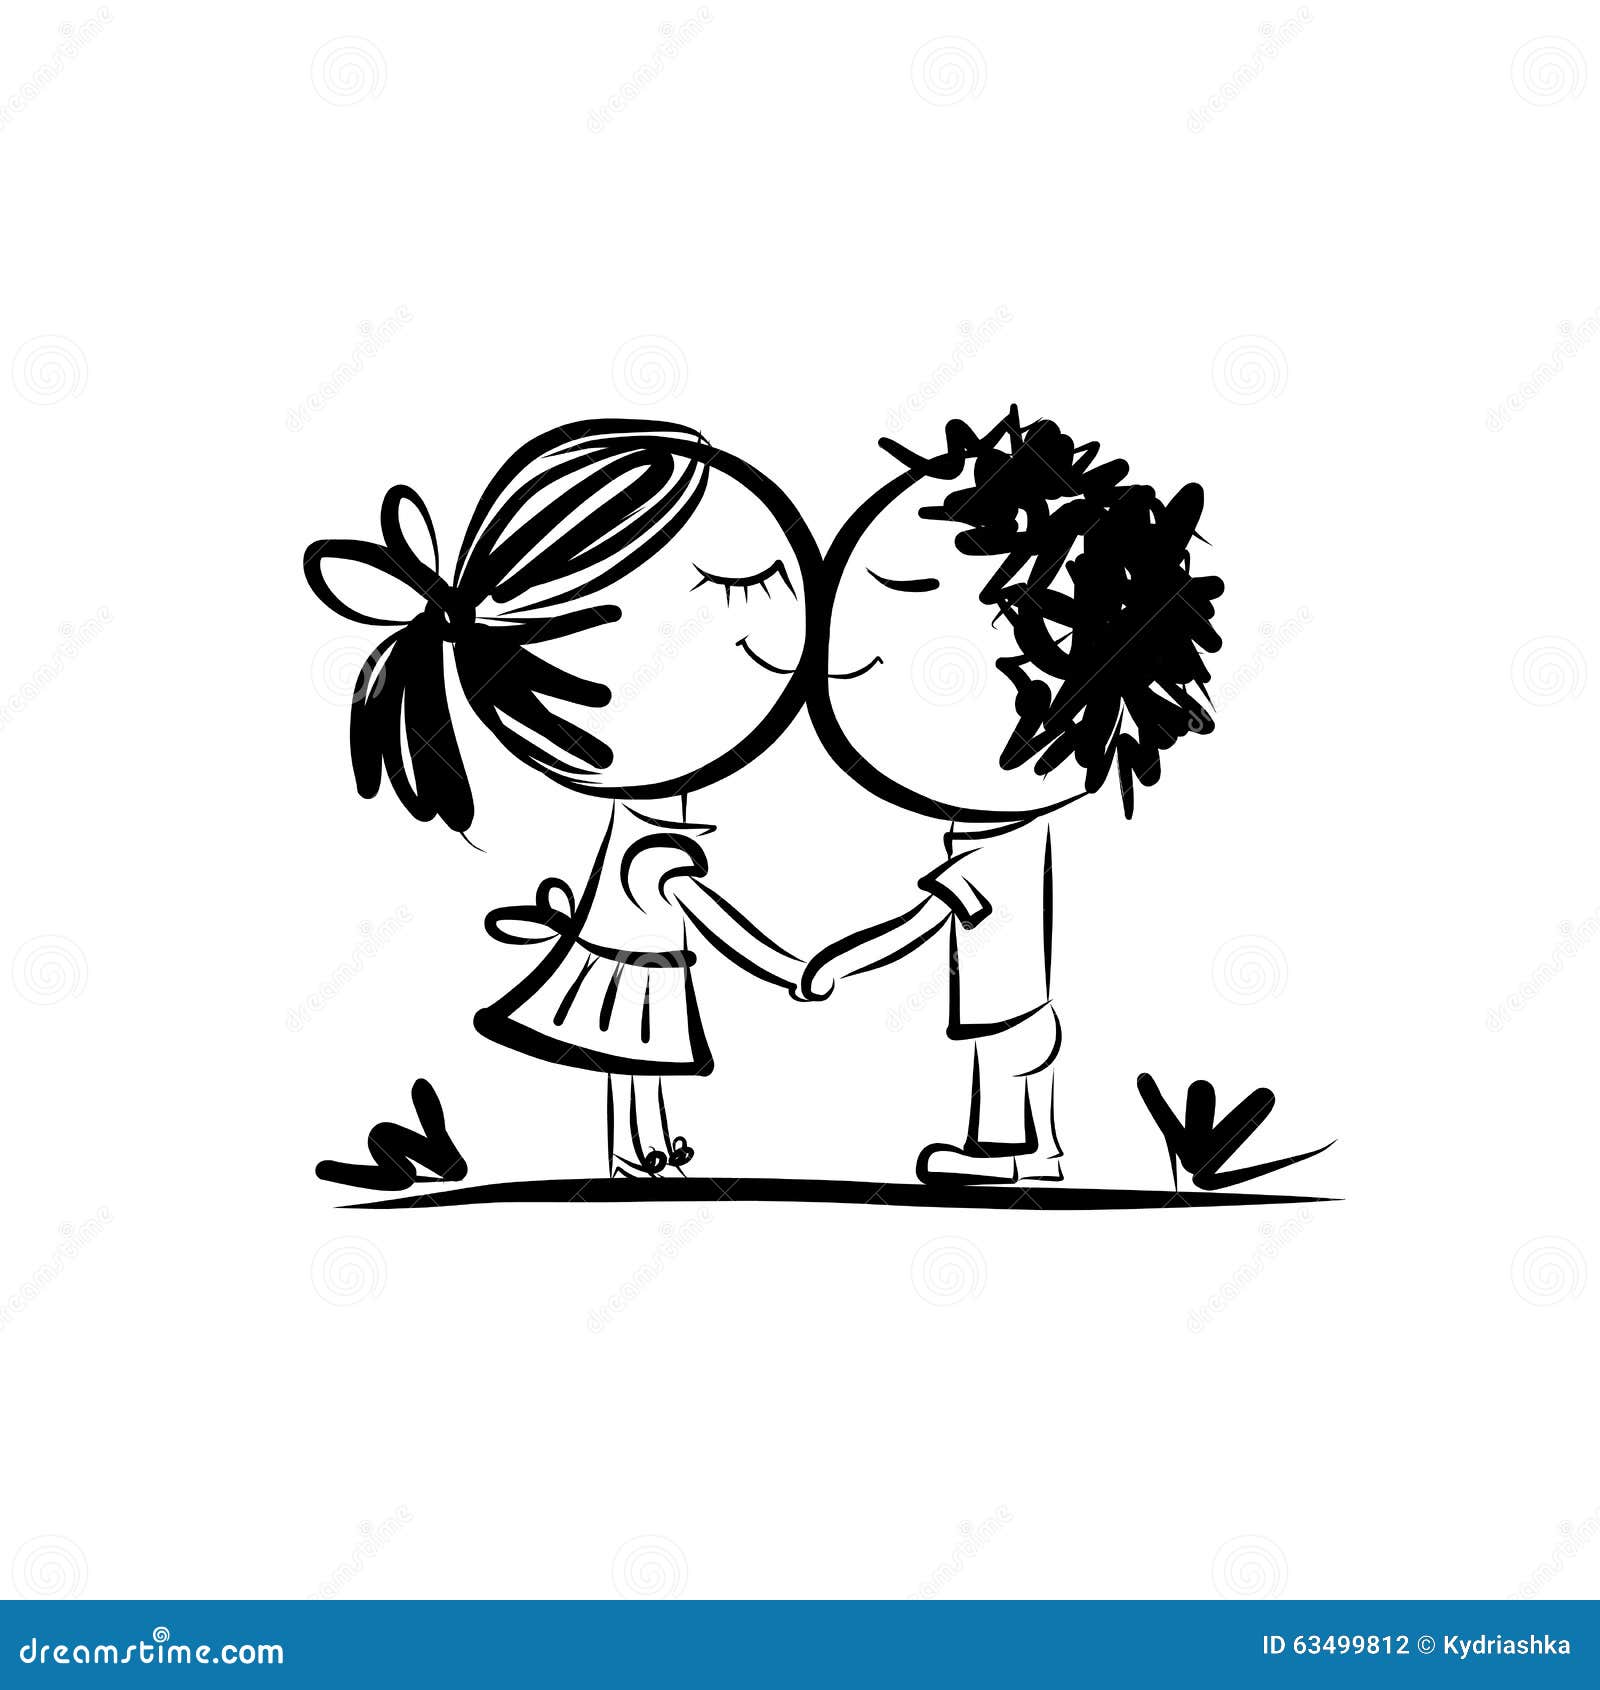 Hands Together Drawing Stock Illustration  Download Image Now  Teamwork  Doodle Black And White  iStock